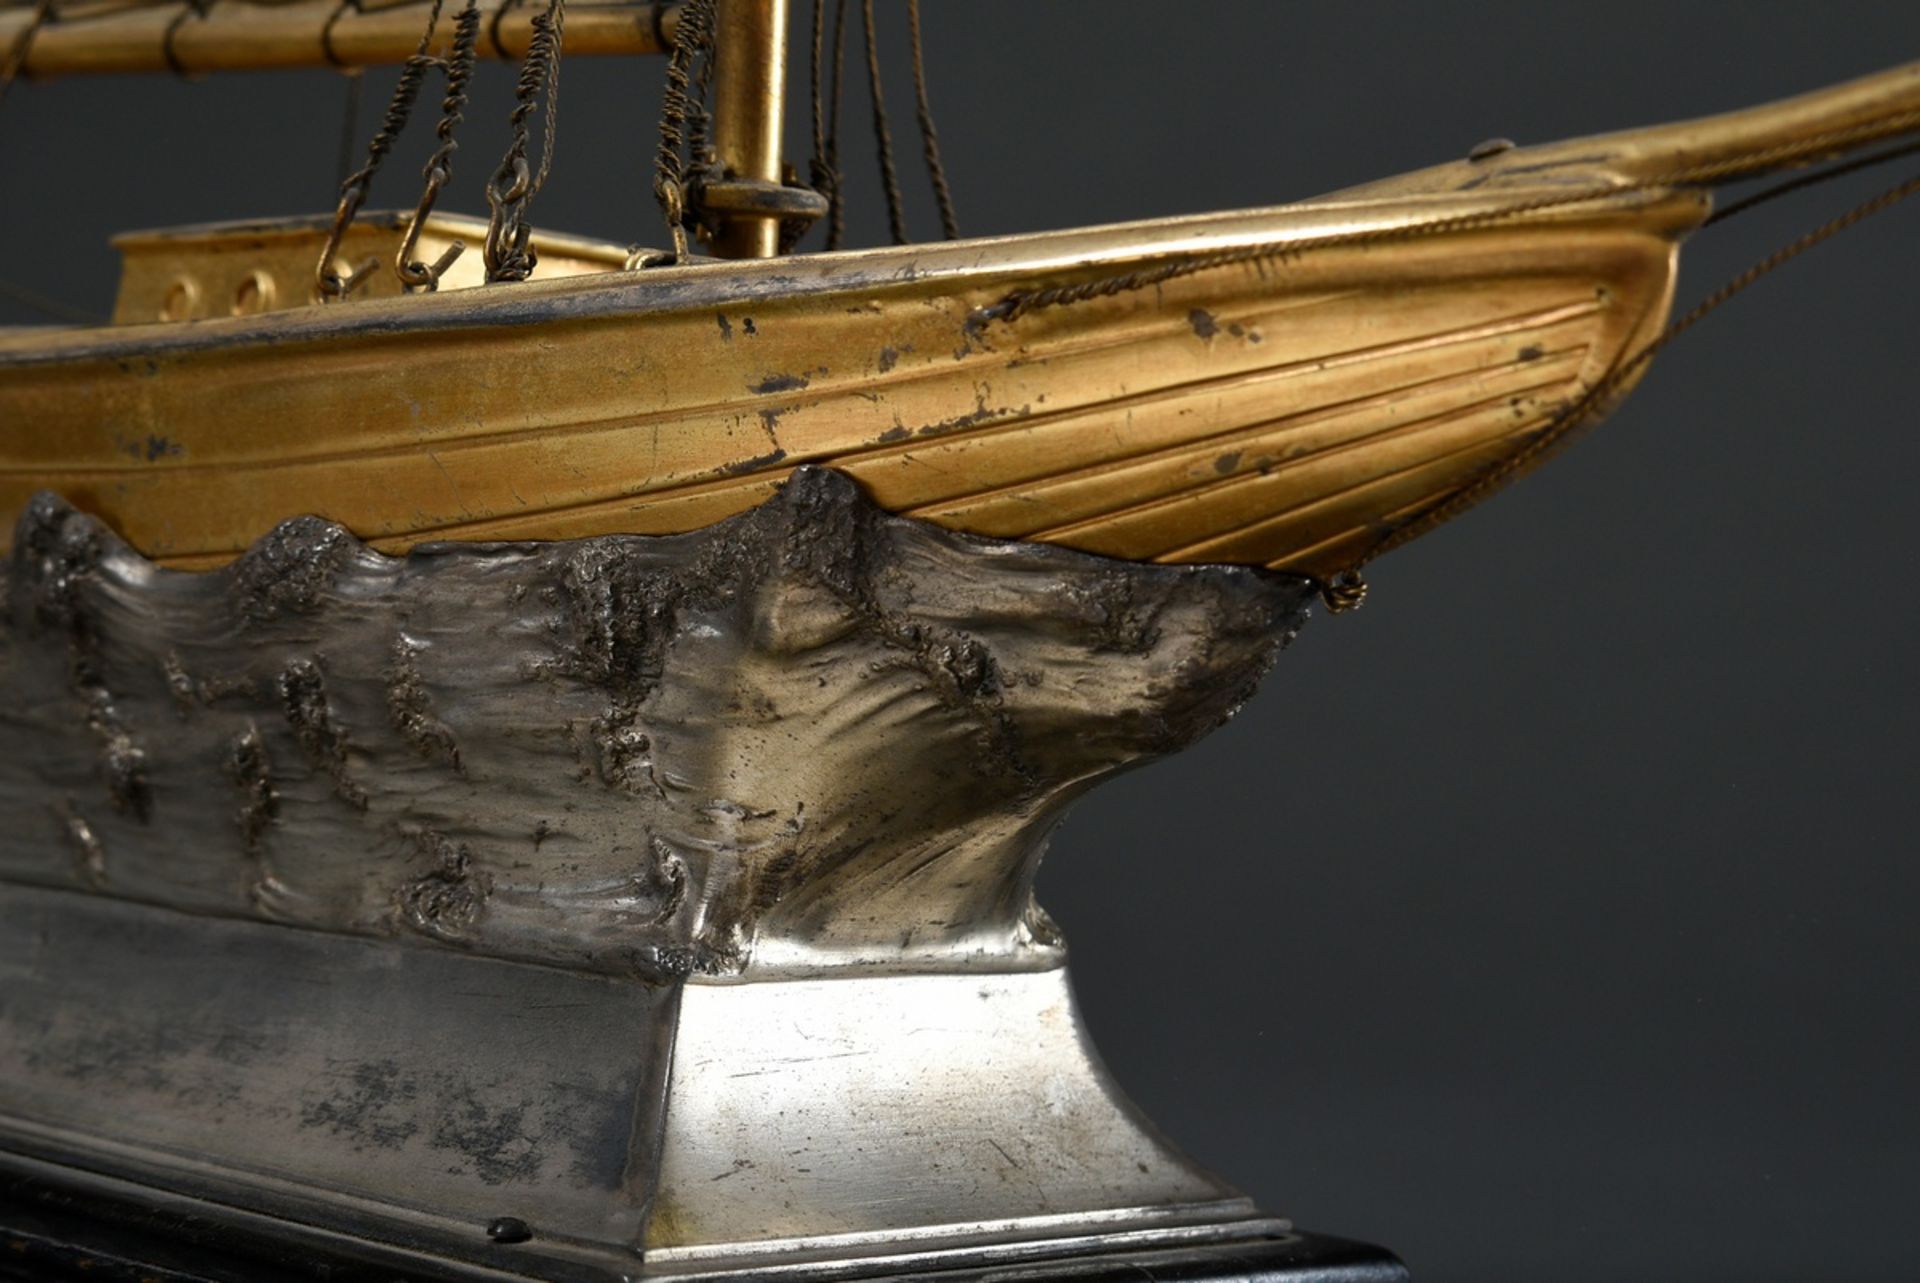 Model ship sailing price "Yacht", wood/metal, galvanised, on metal stand with sculptural waves and  - Image 9 of 9